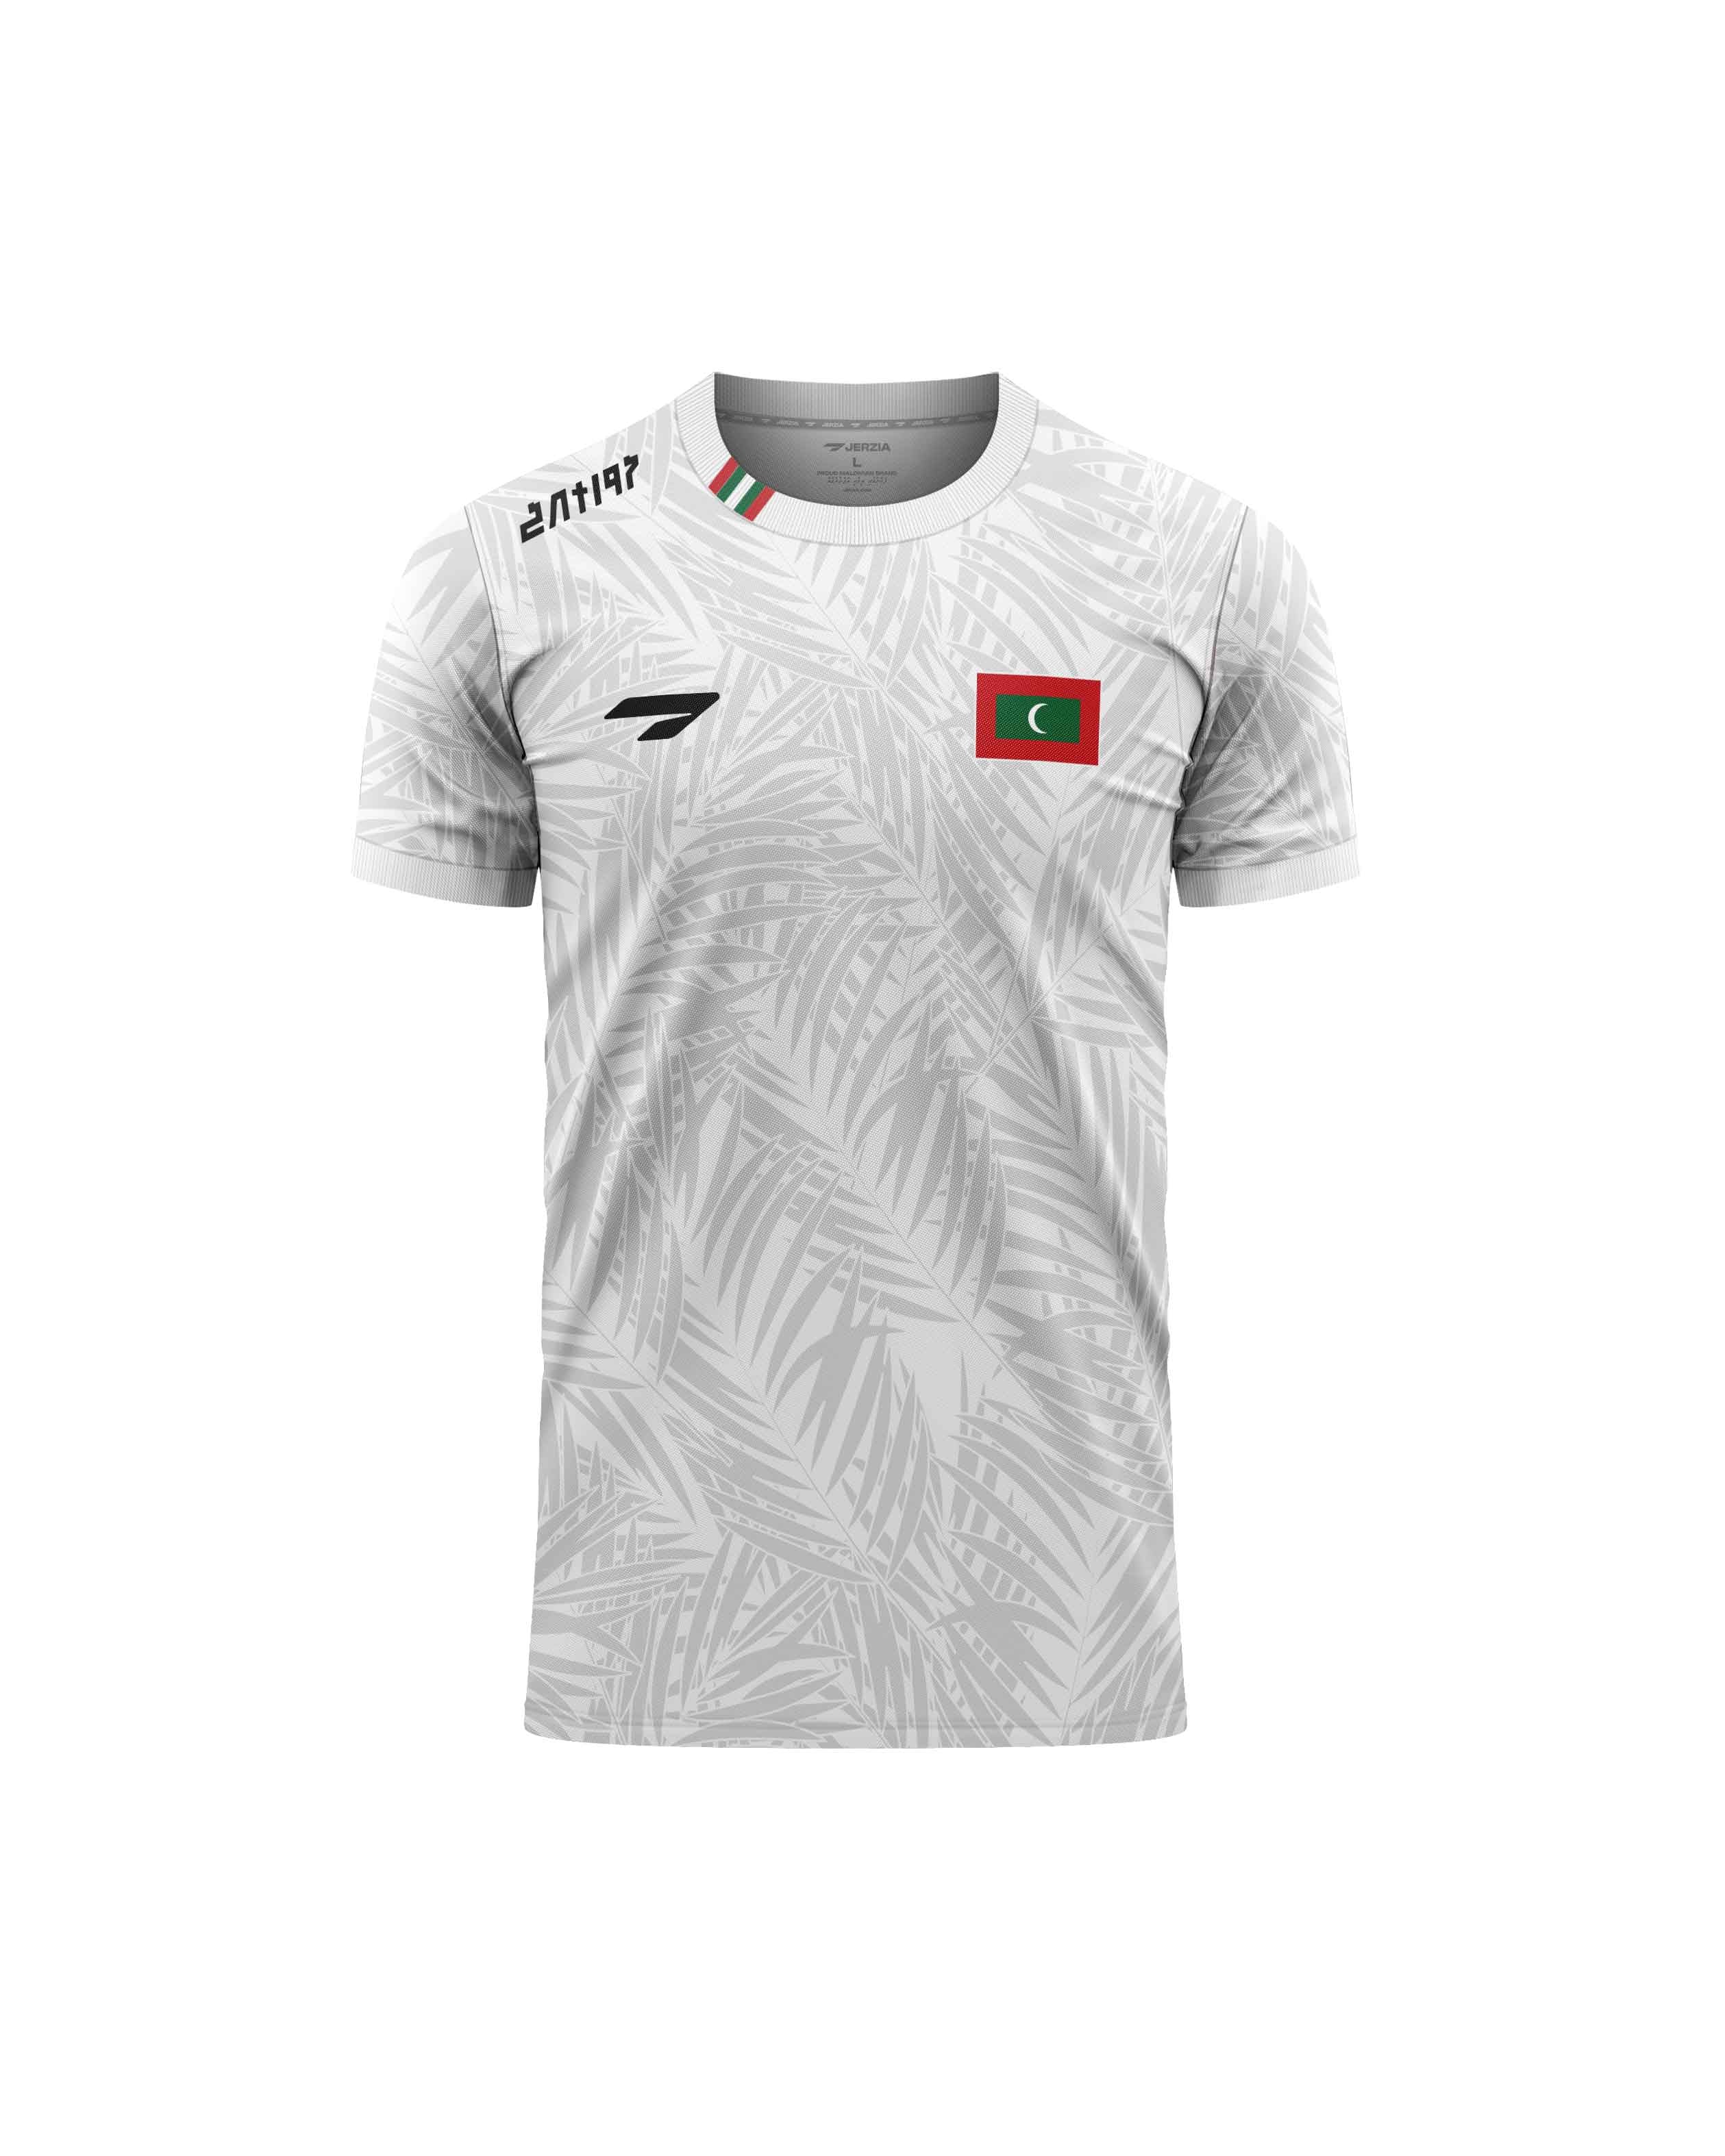 Maldives National Team Supporters Officials White Jersey SS